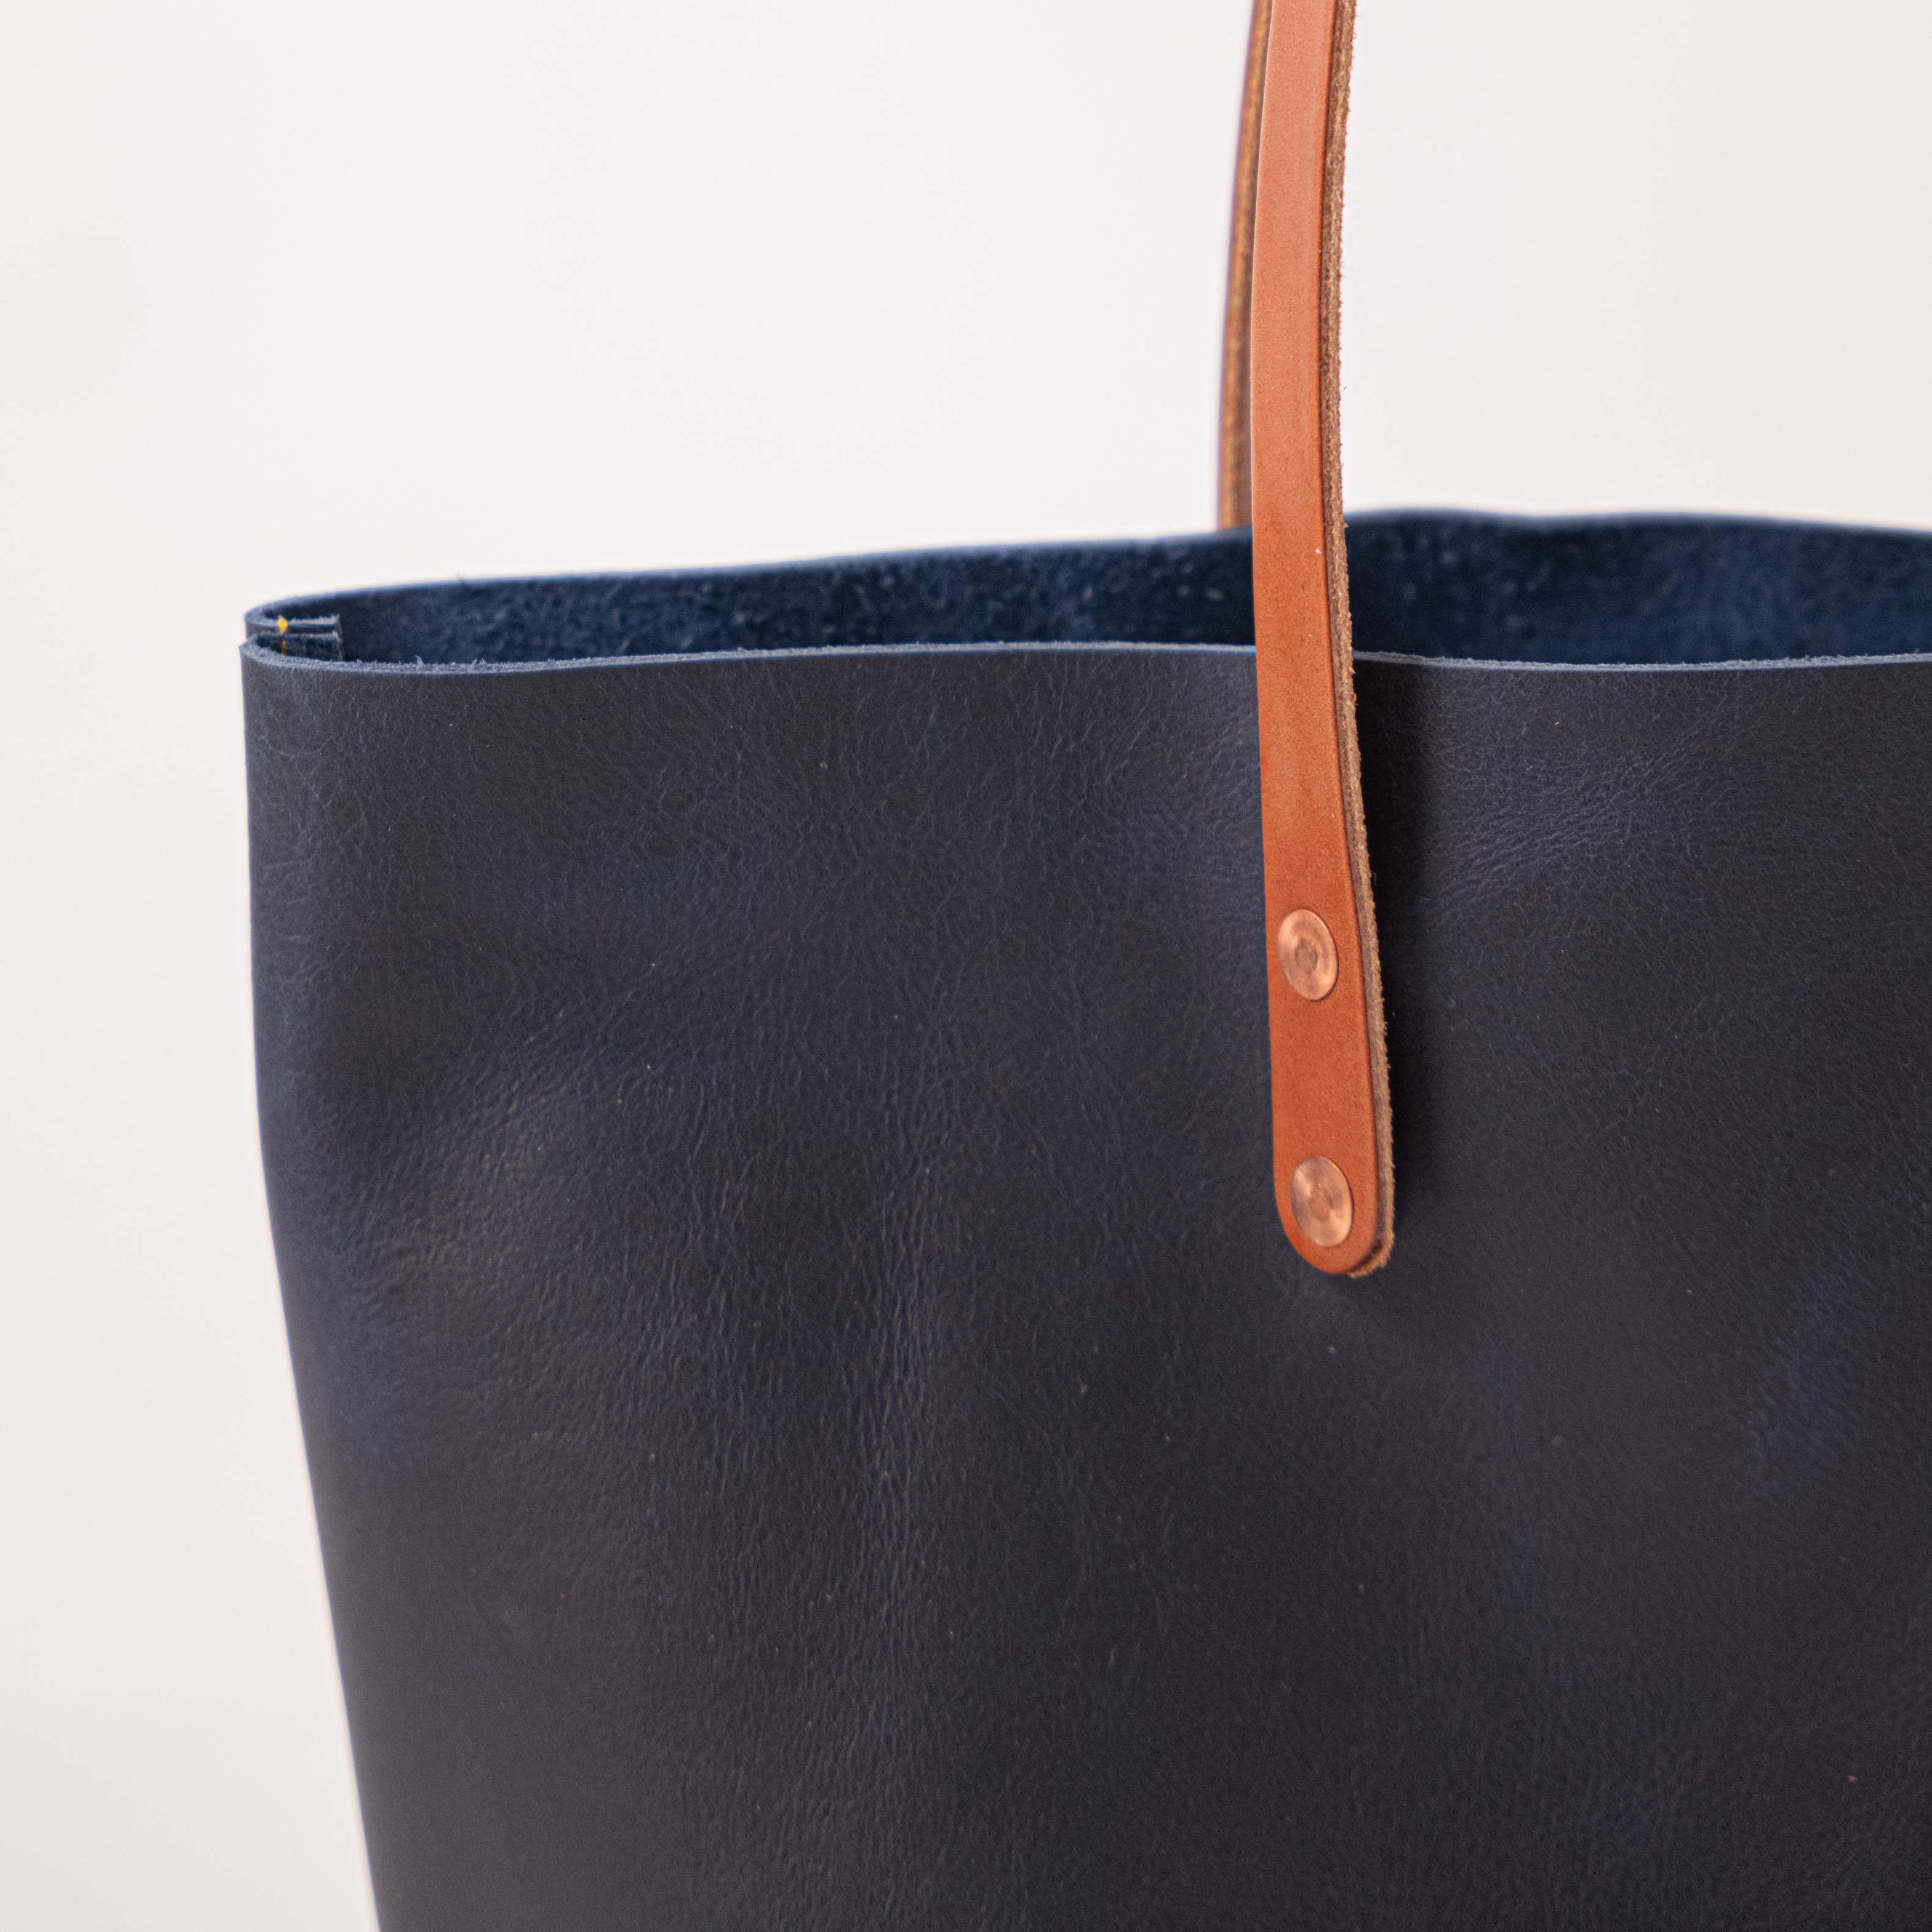 Navy Kodiak  Navy Blue Leather Tote Bags, Handbags, and Clutch Bags –  tagged Tassels – KMM & Co.